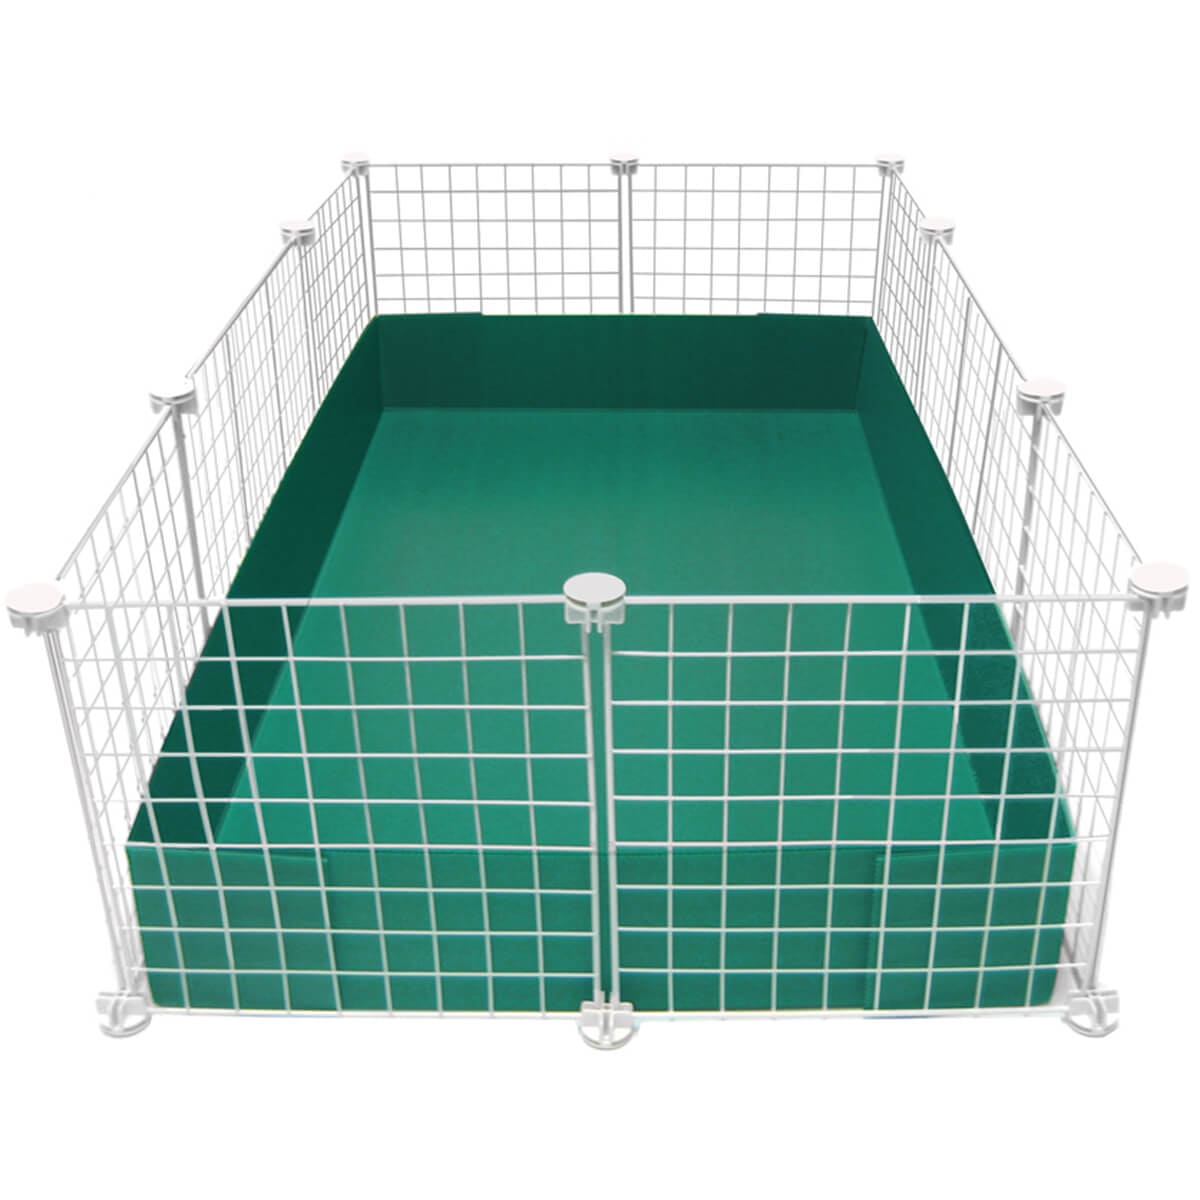 Medium Green C&C guinea pig cage with white grids and connectors